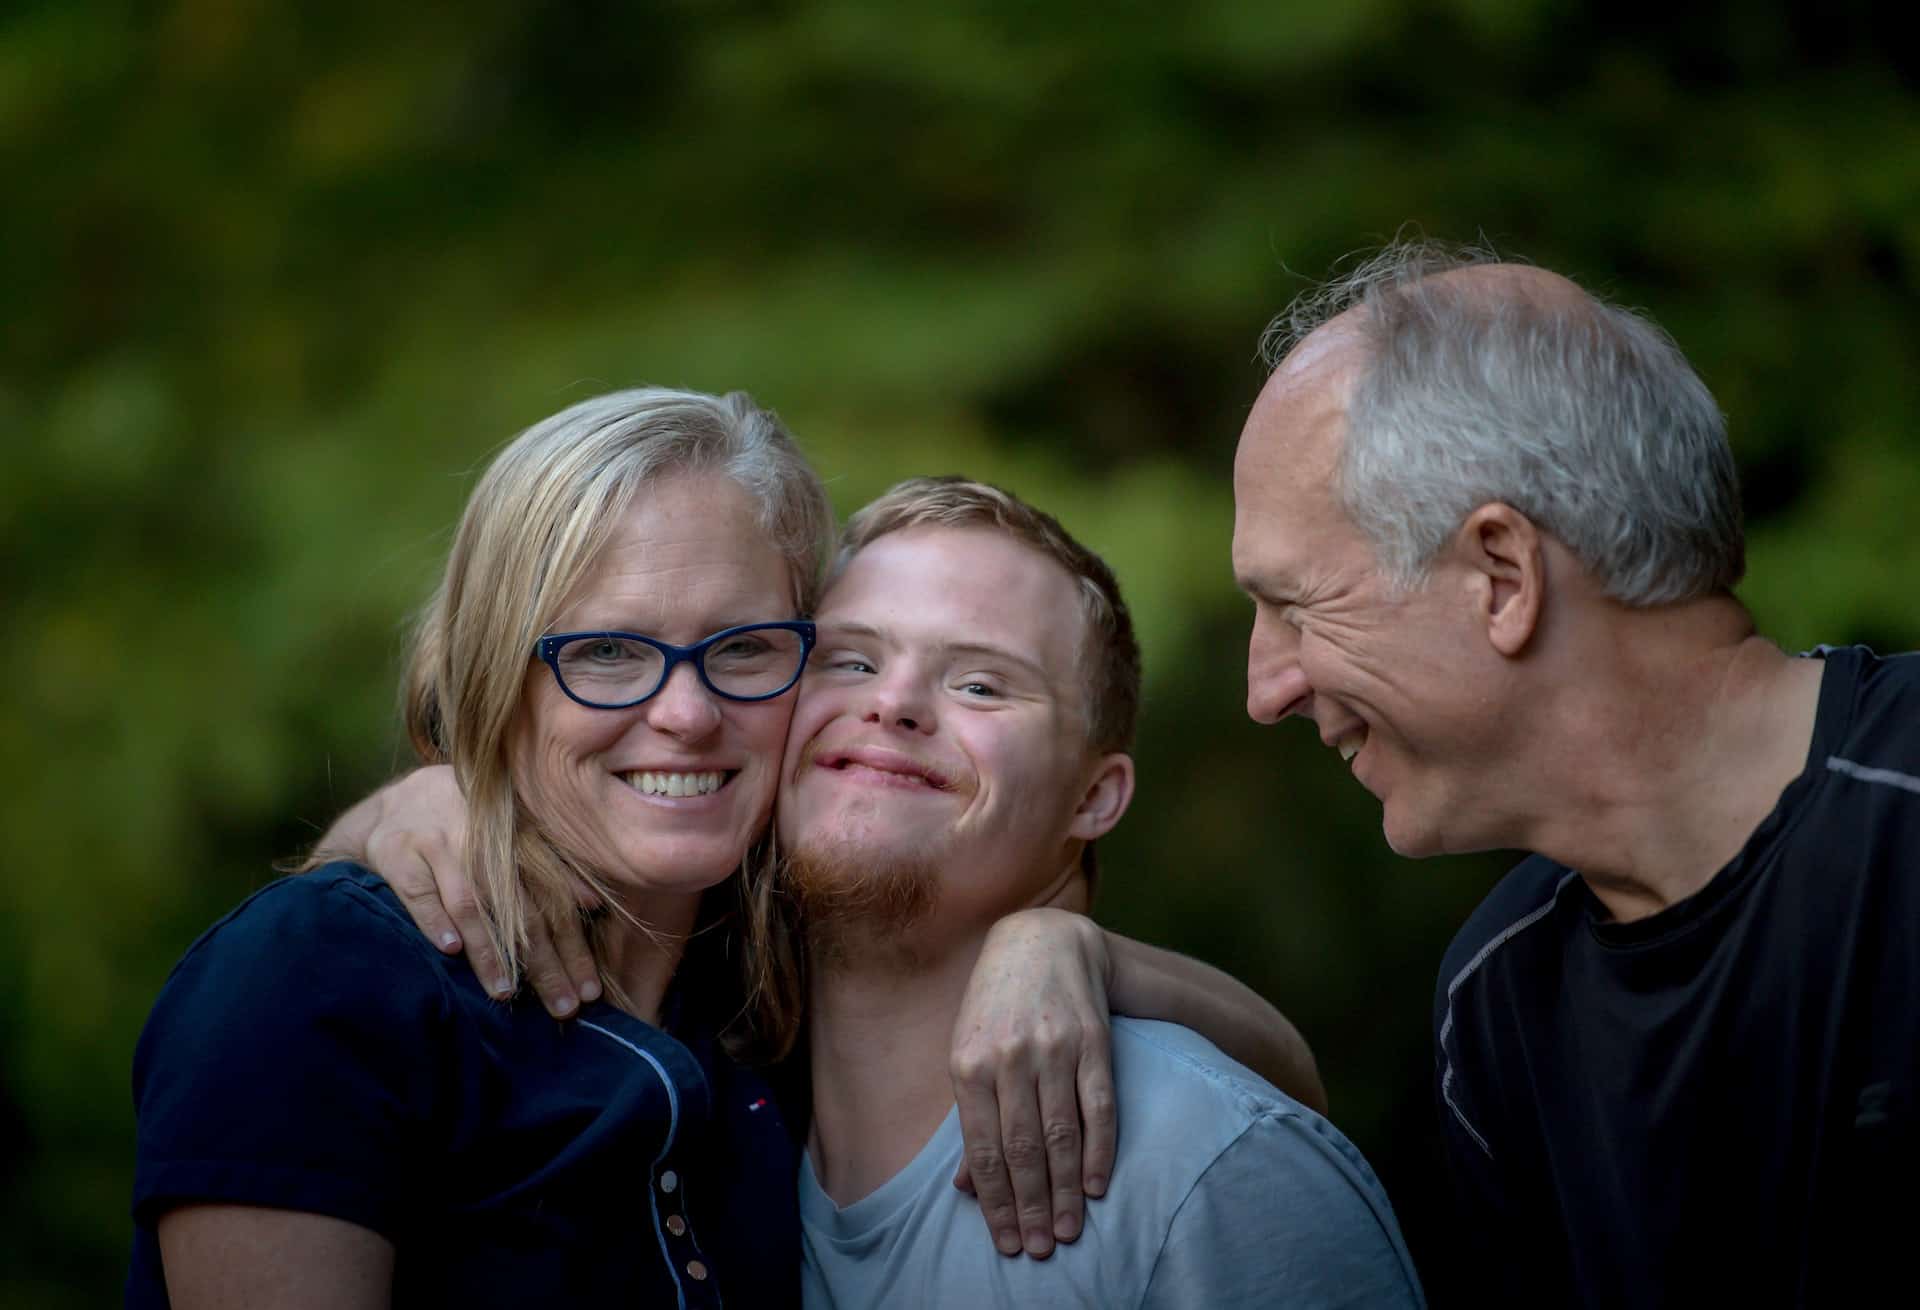 Down syndrome kid with parents